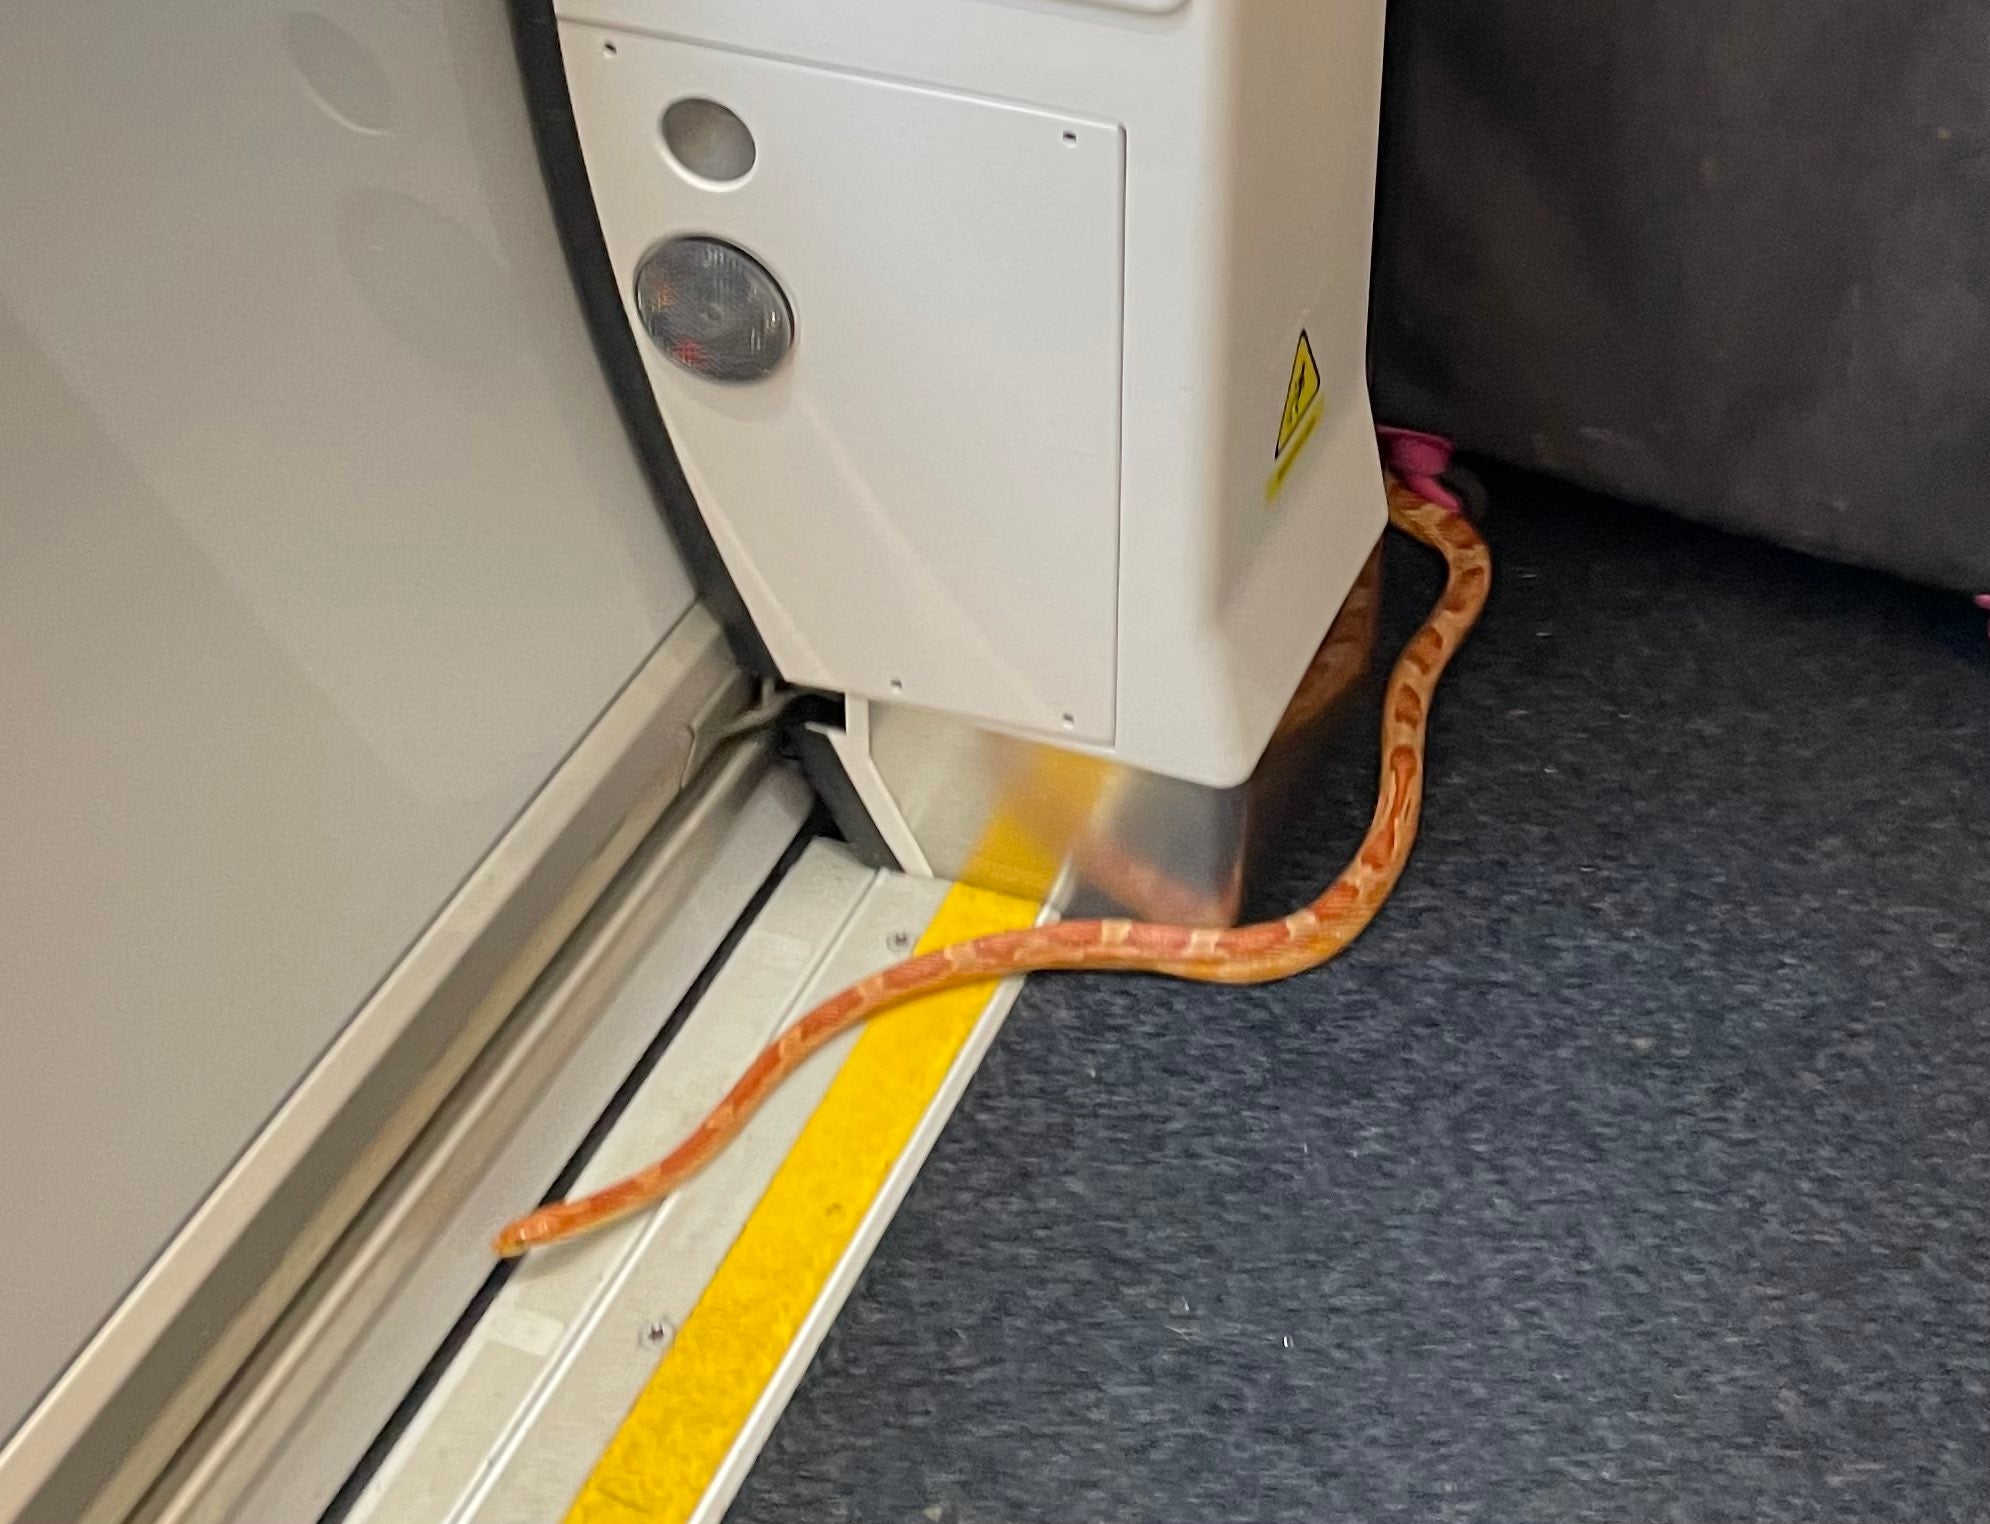 The runaway reptile was spotted on a train from Shipley to Leeds